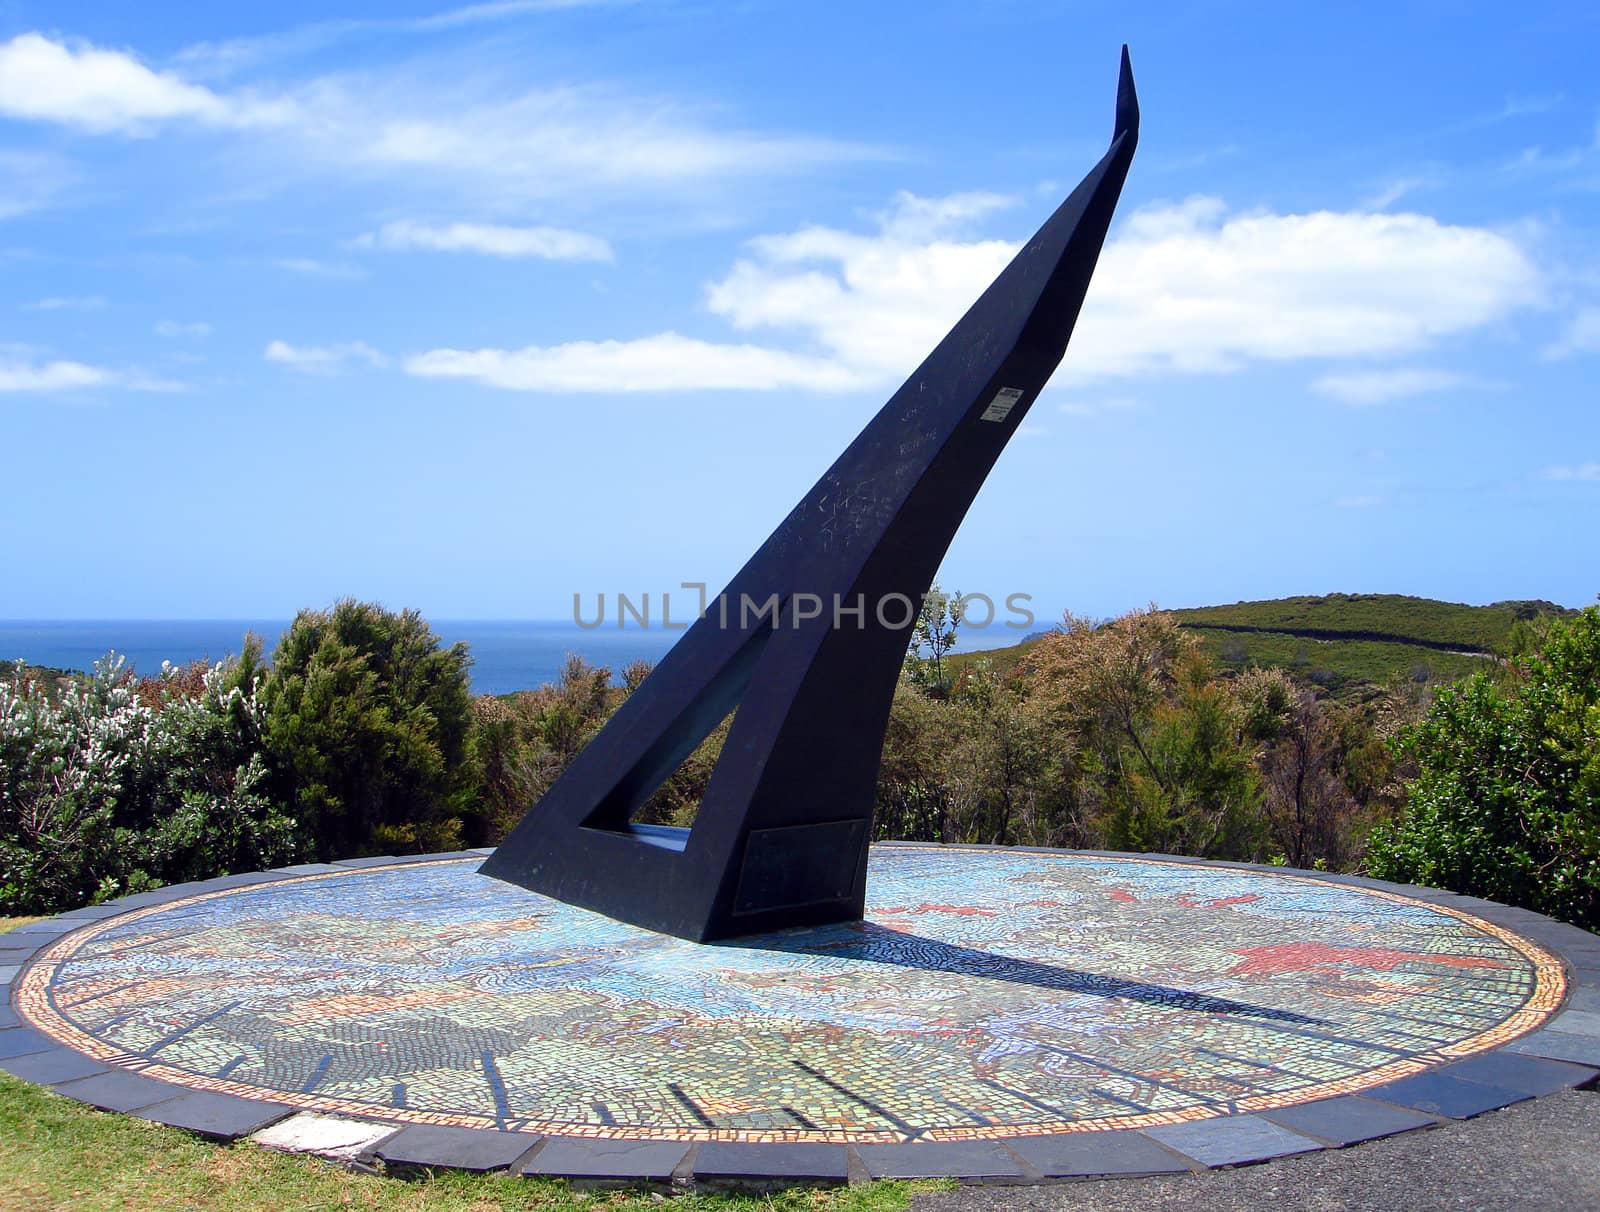 Giant Sundial with a Mosaic Map of the Bay of Islands, Russell, New Zealand